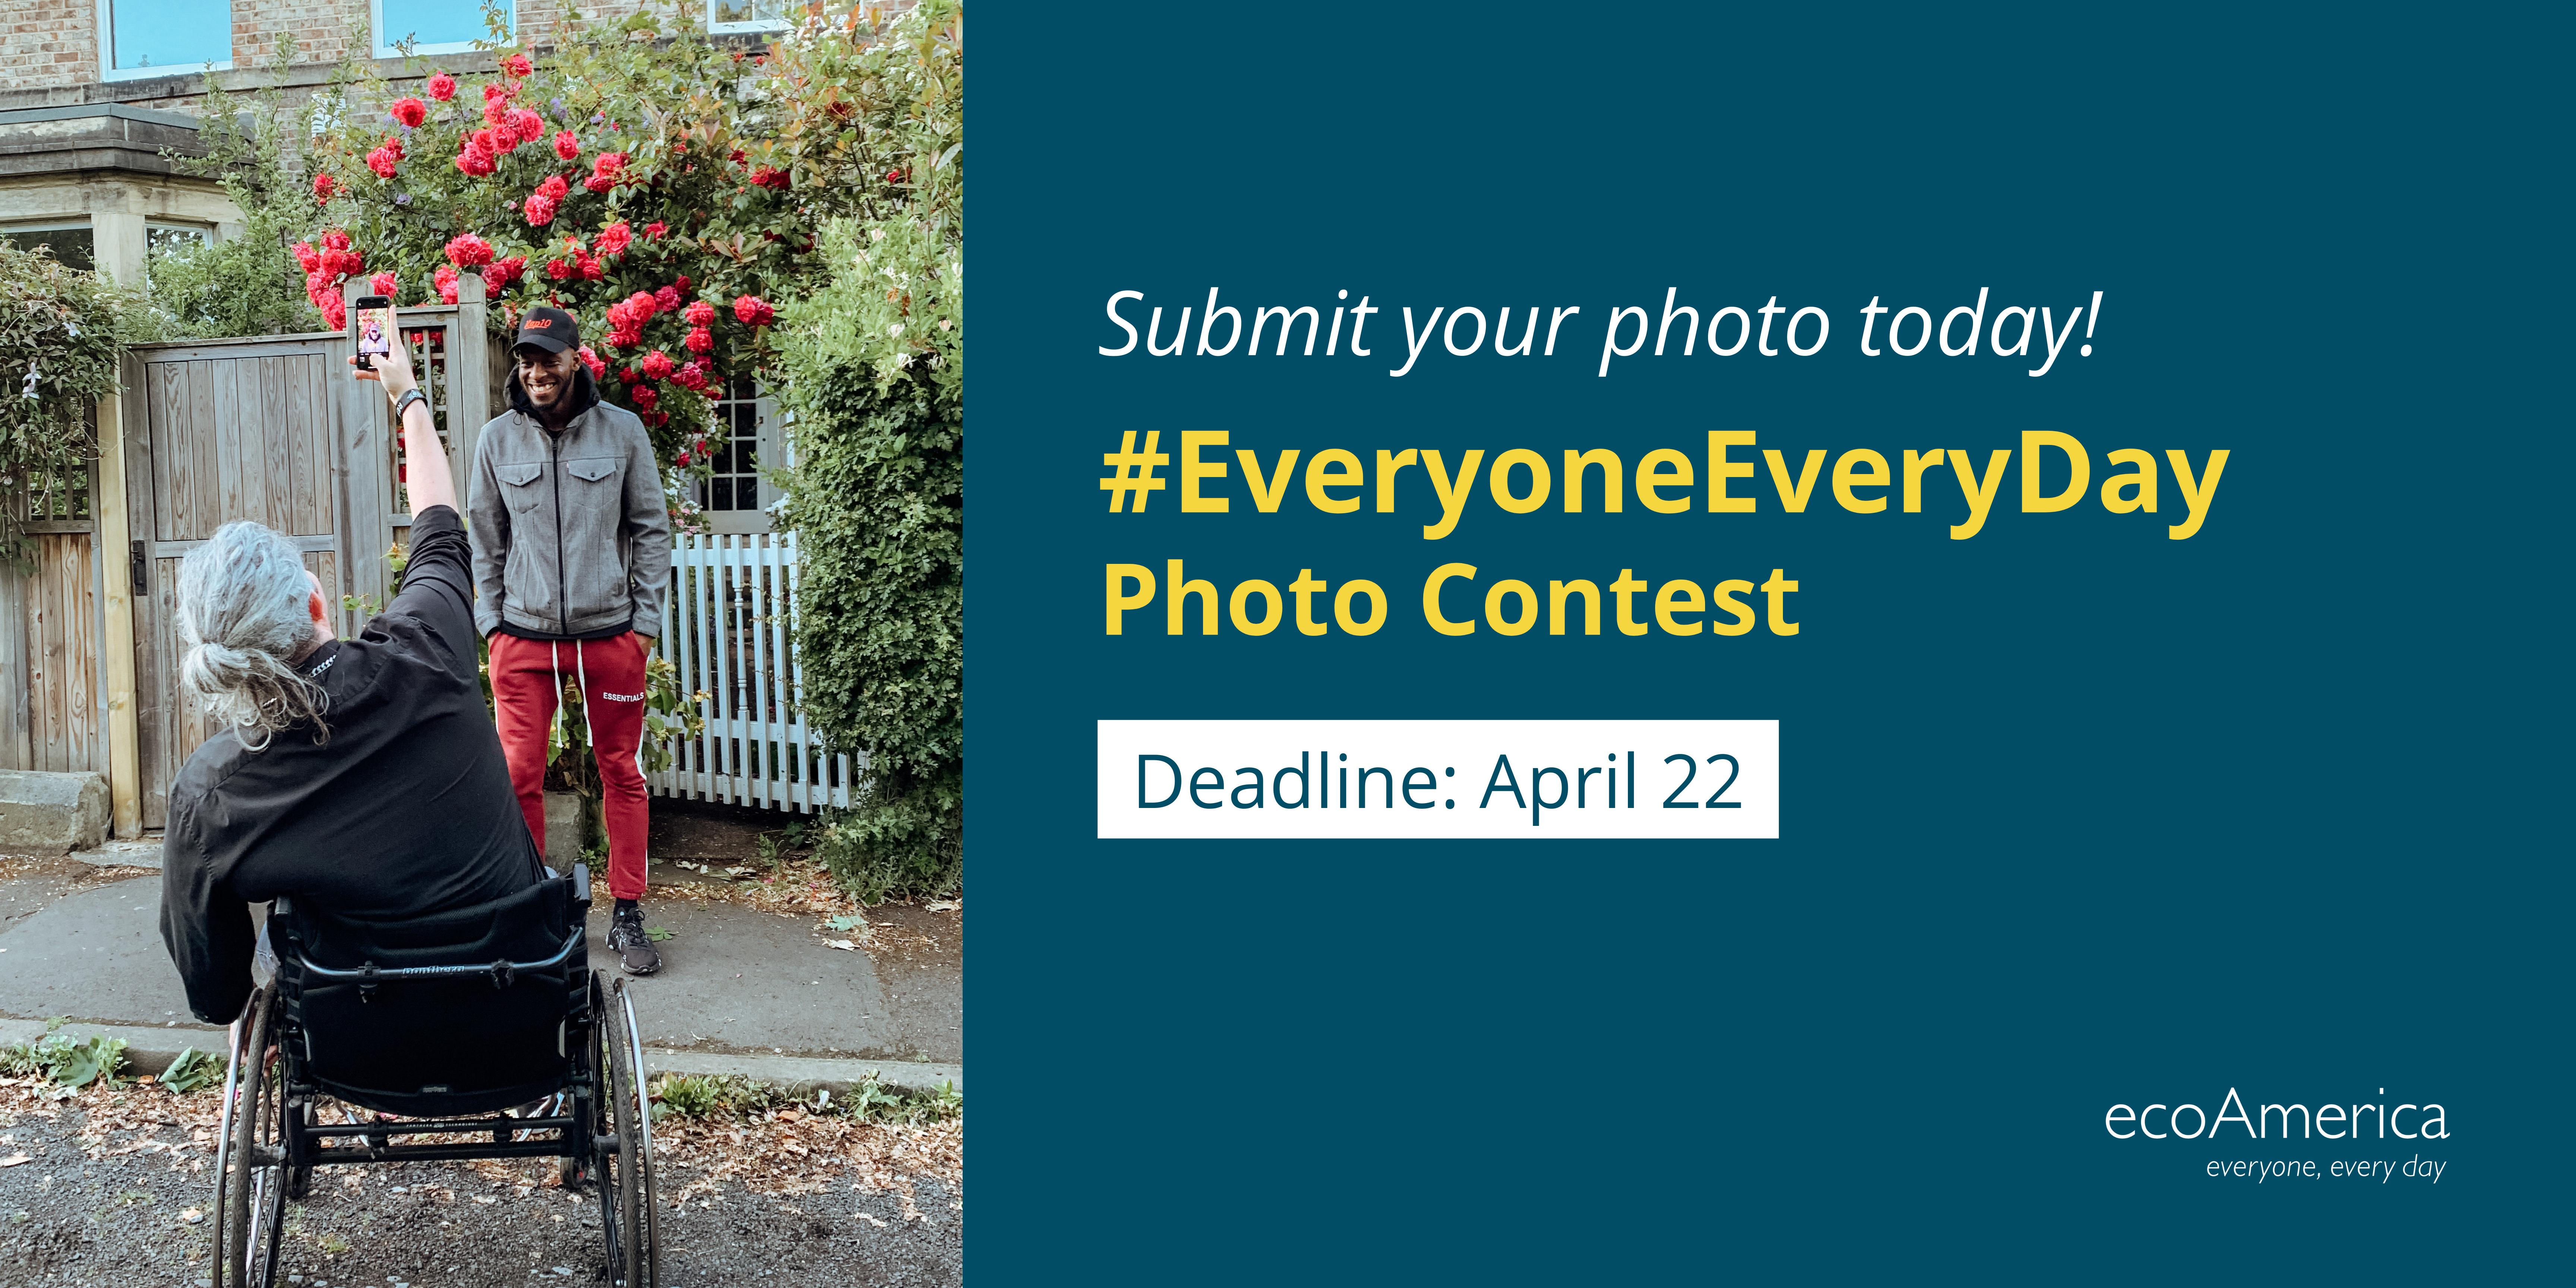 Social media card for the #EveryonEveryDay photo contest that has a dark blue background and an image on the right of a person in a wheel chair taking a picture of a person standing with a house behind them